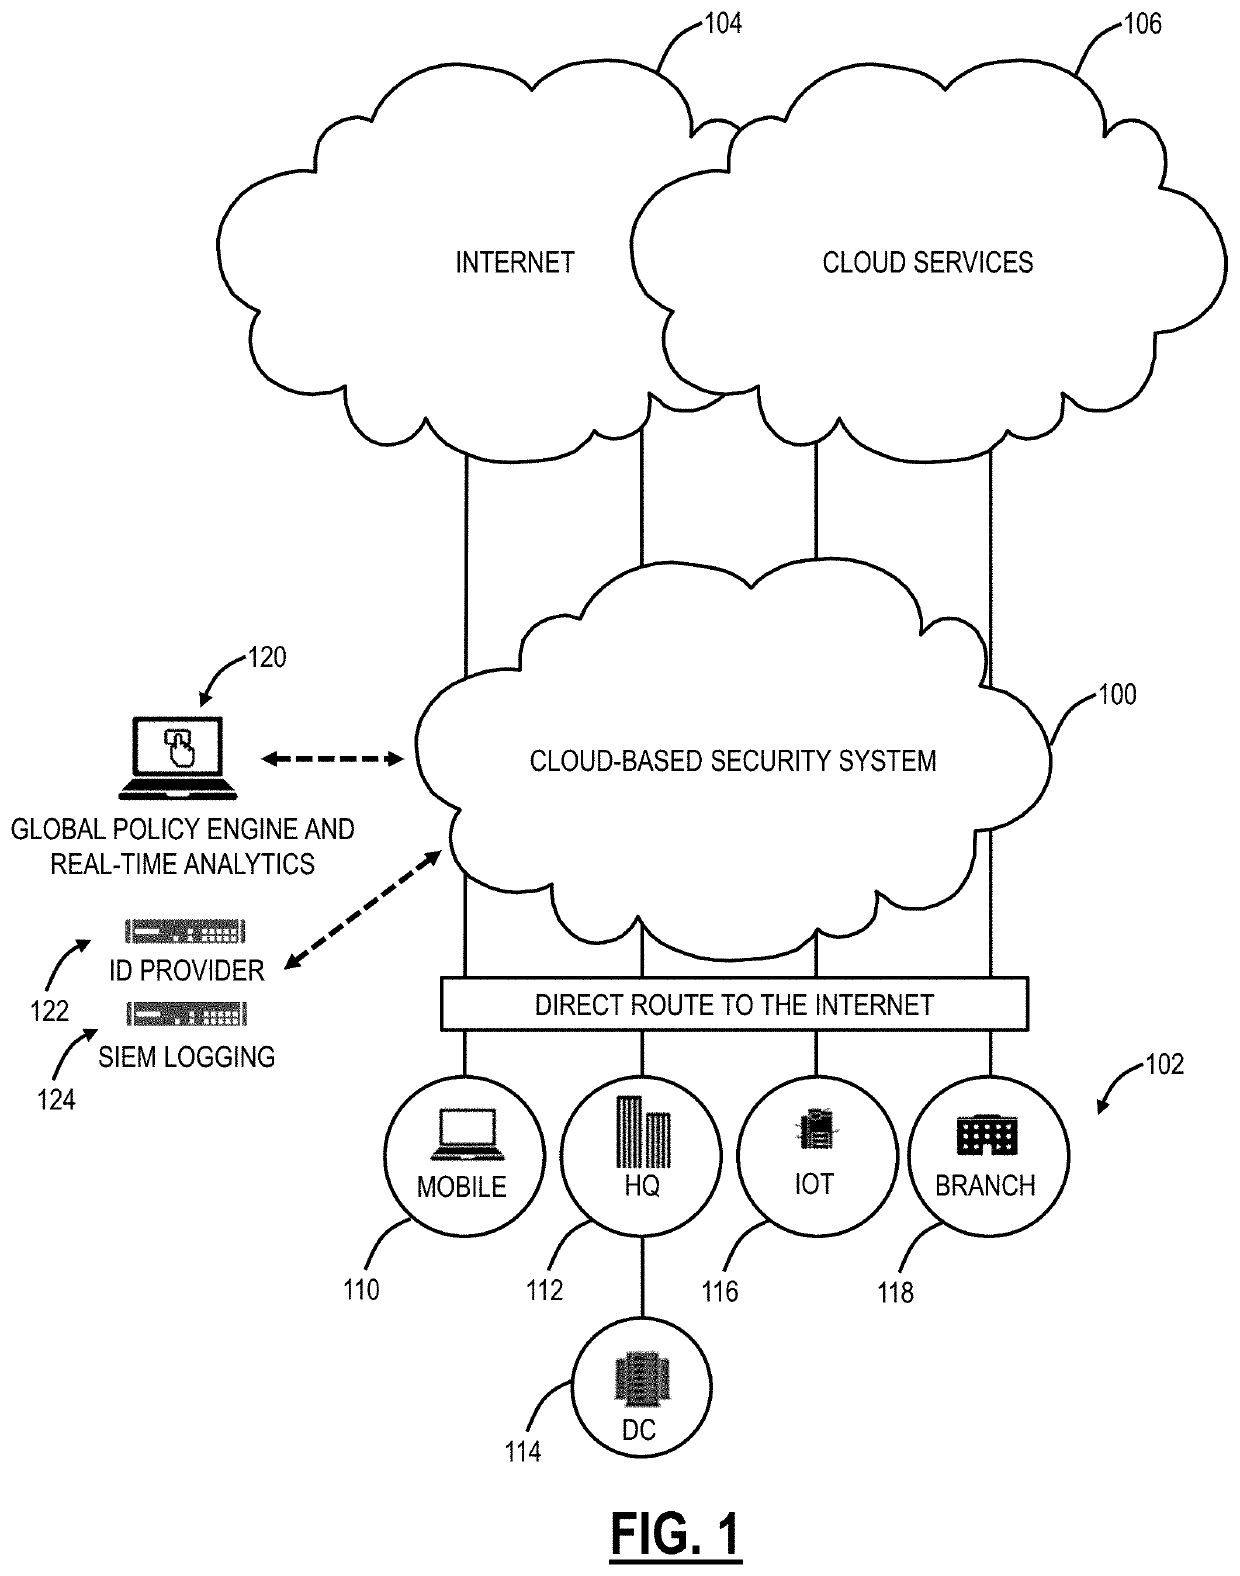 Utilizing endpoint security posture, identification, and remote attestation for restricting private application access